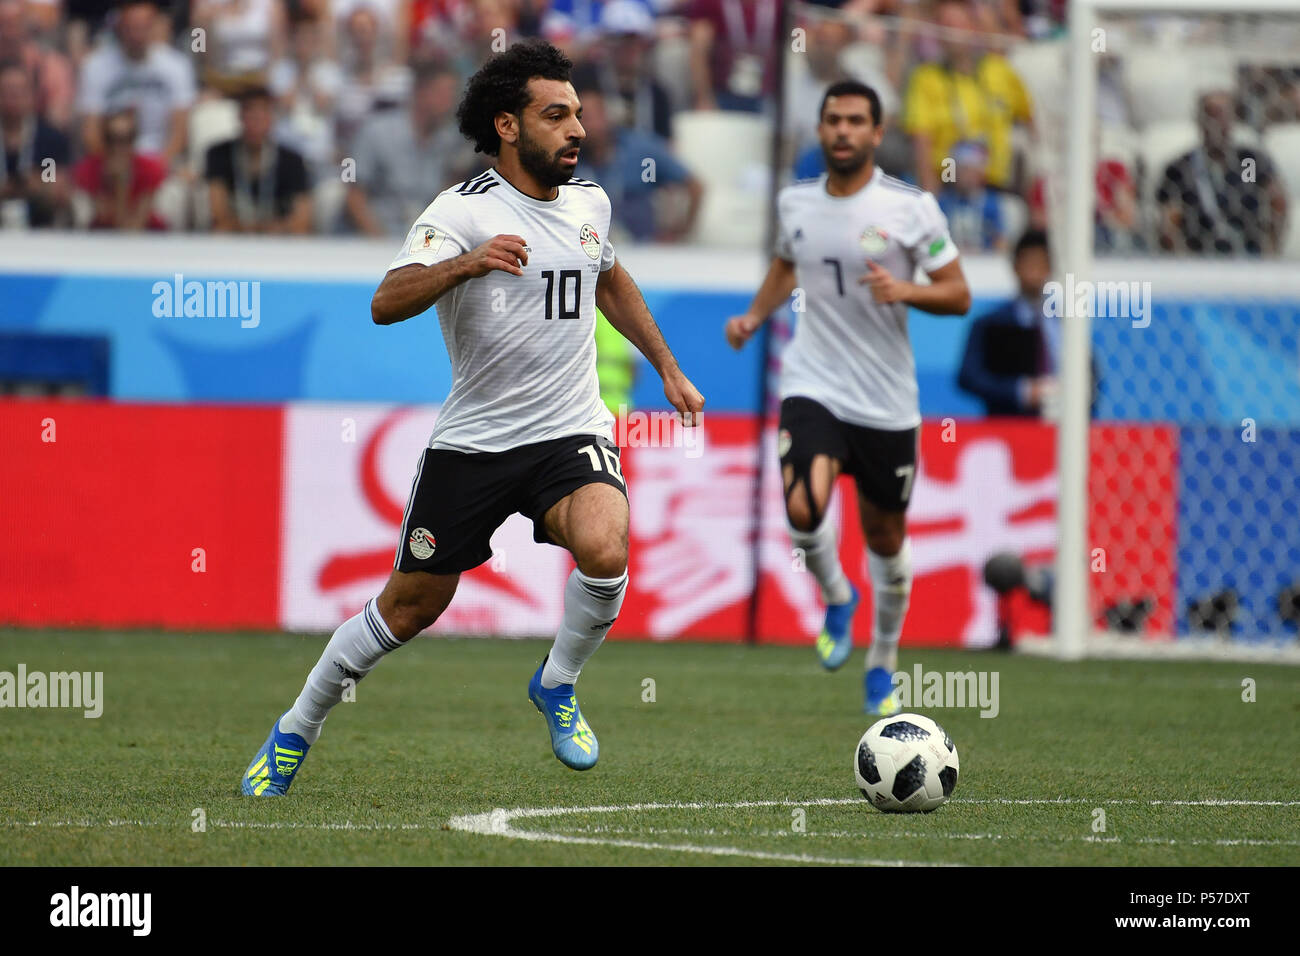 Volgograd, Russland. 25th June, 2018. Mohamed SALAH (EGY), Action, Single Action, Frame, Cut Out, Full Body, Whole Figure. Saudi Arabia (KSA) Egypt (EGY) 2-1, Preliminary Round, Group A, Game 34, on 25.06.2018 in Volgograd, Volgograd Arena. Football World Cup 2018 in Russia from 14.06. - 15.07.2018. | usage worldwide Credit: dpa/Alamy Live News Stock Photo